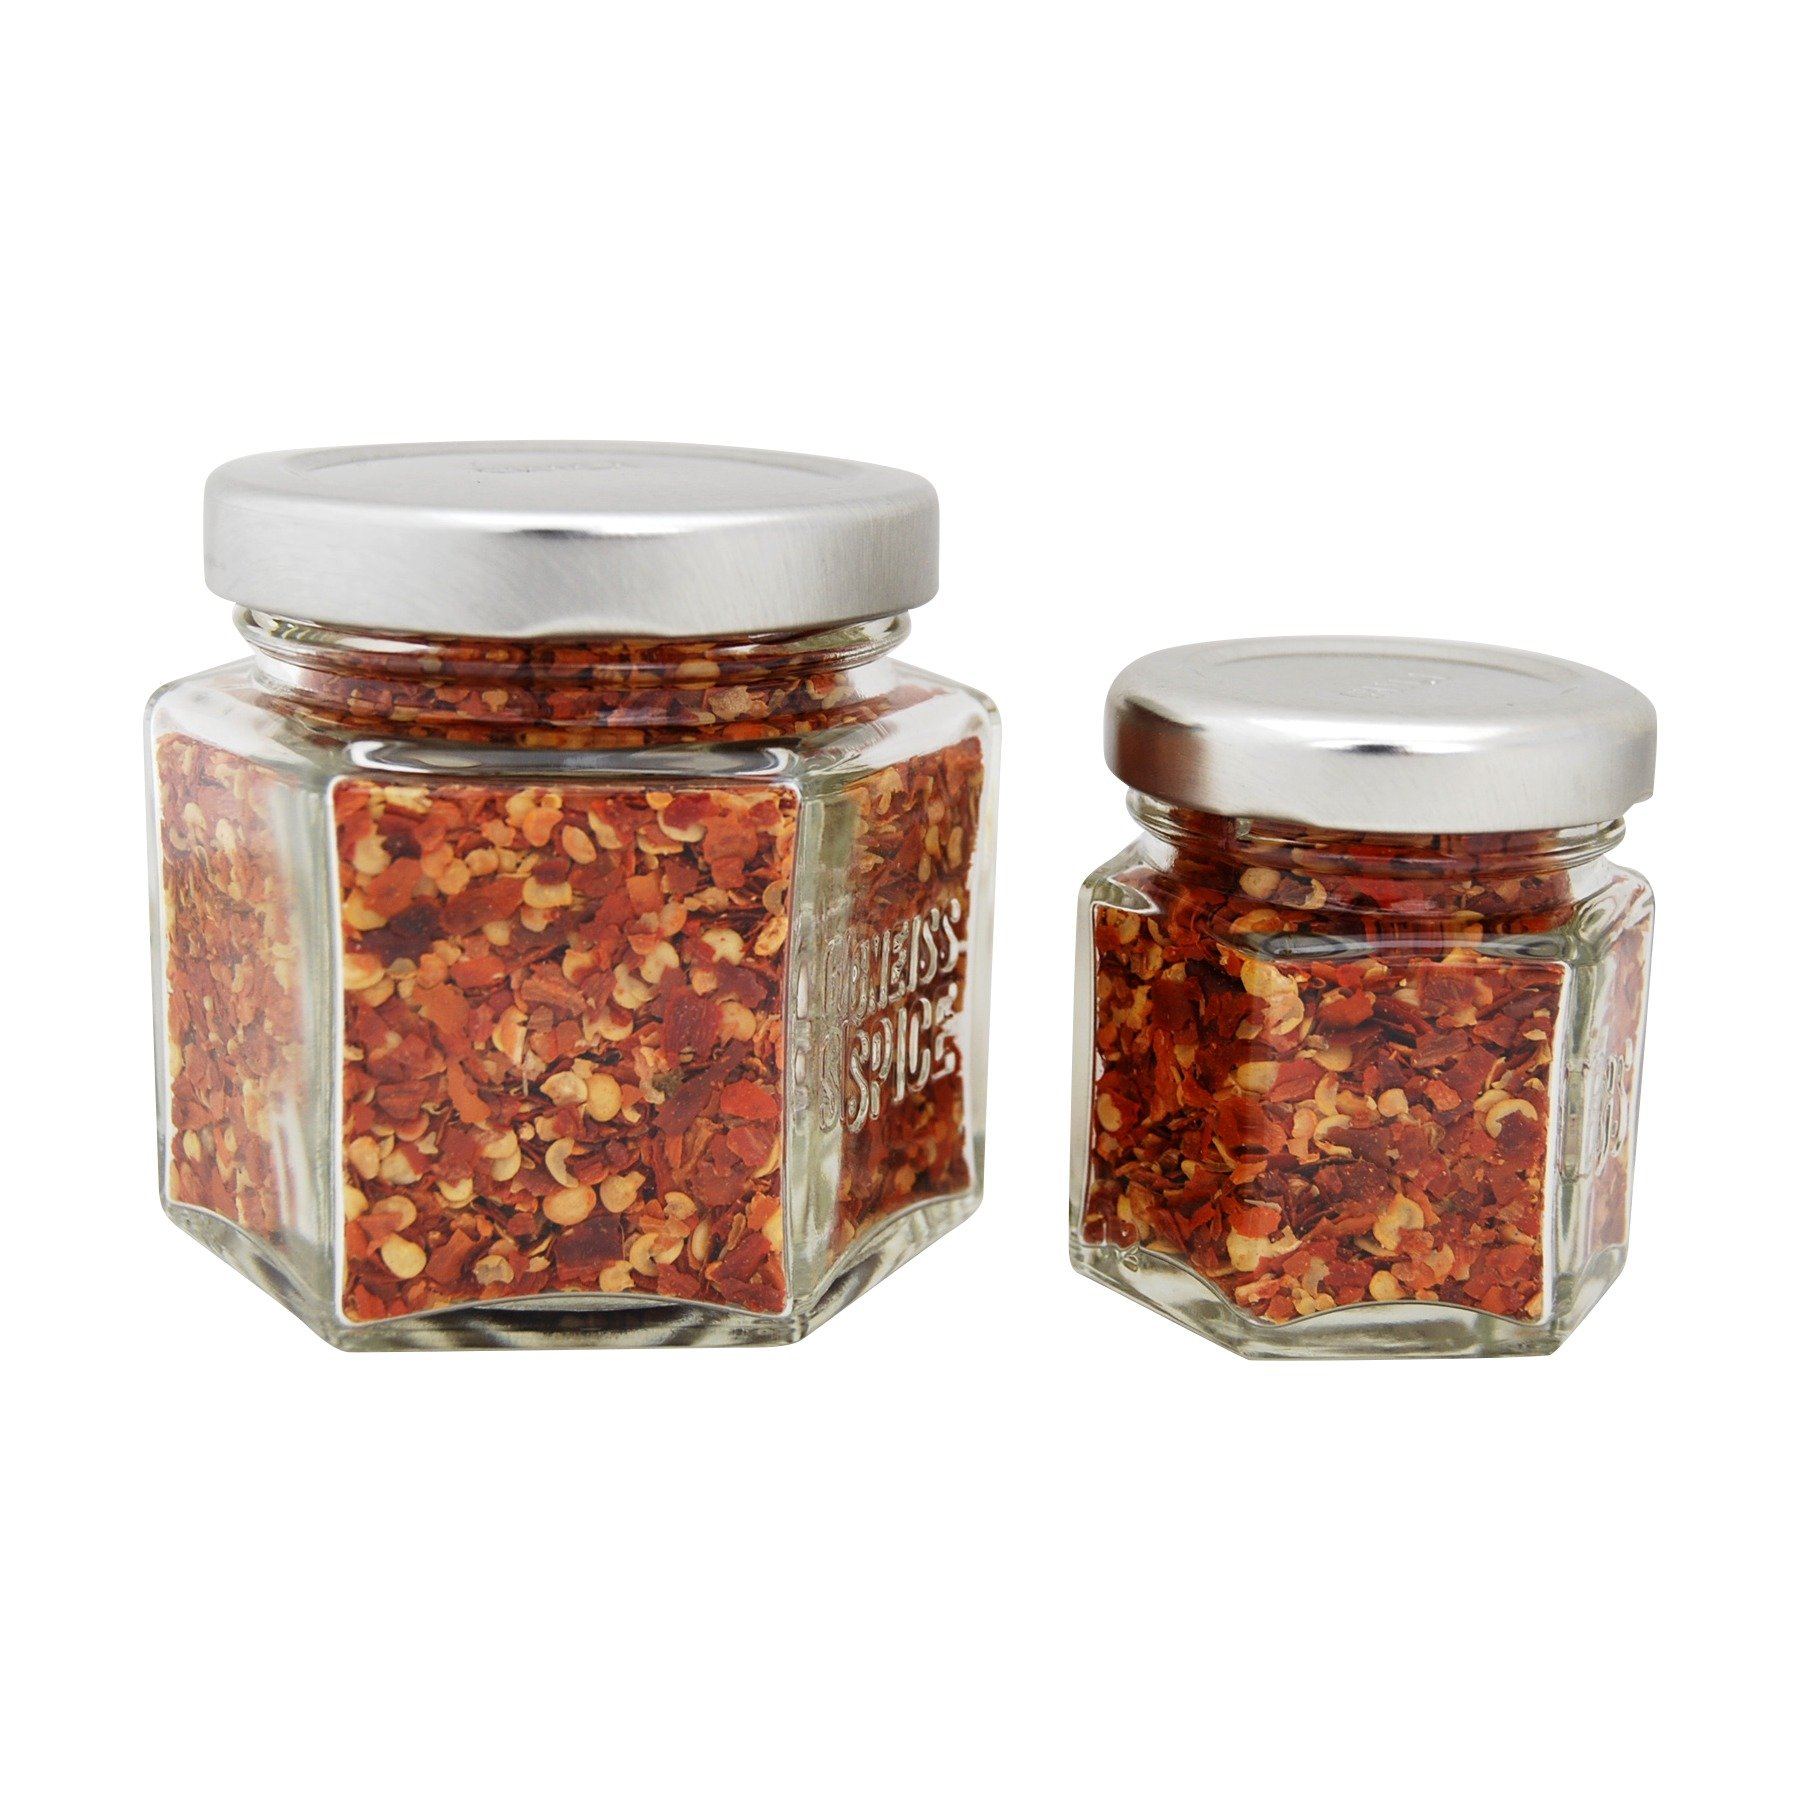 Magnetic Spice Racks and Organic Filled Spice Jars